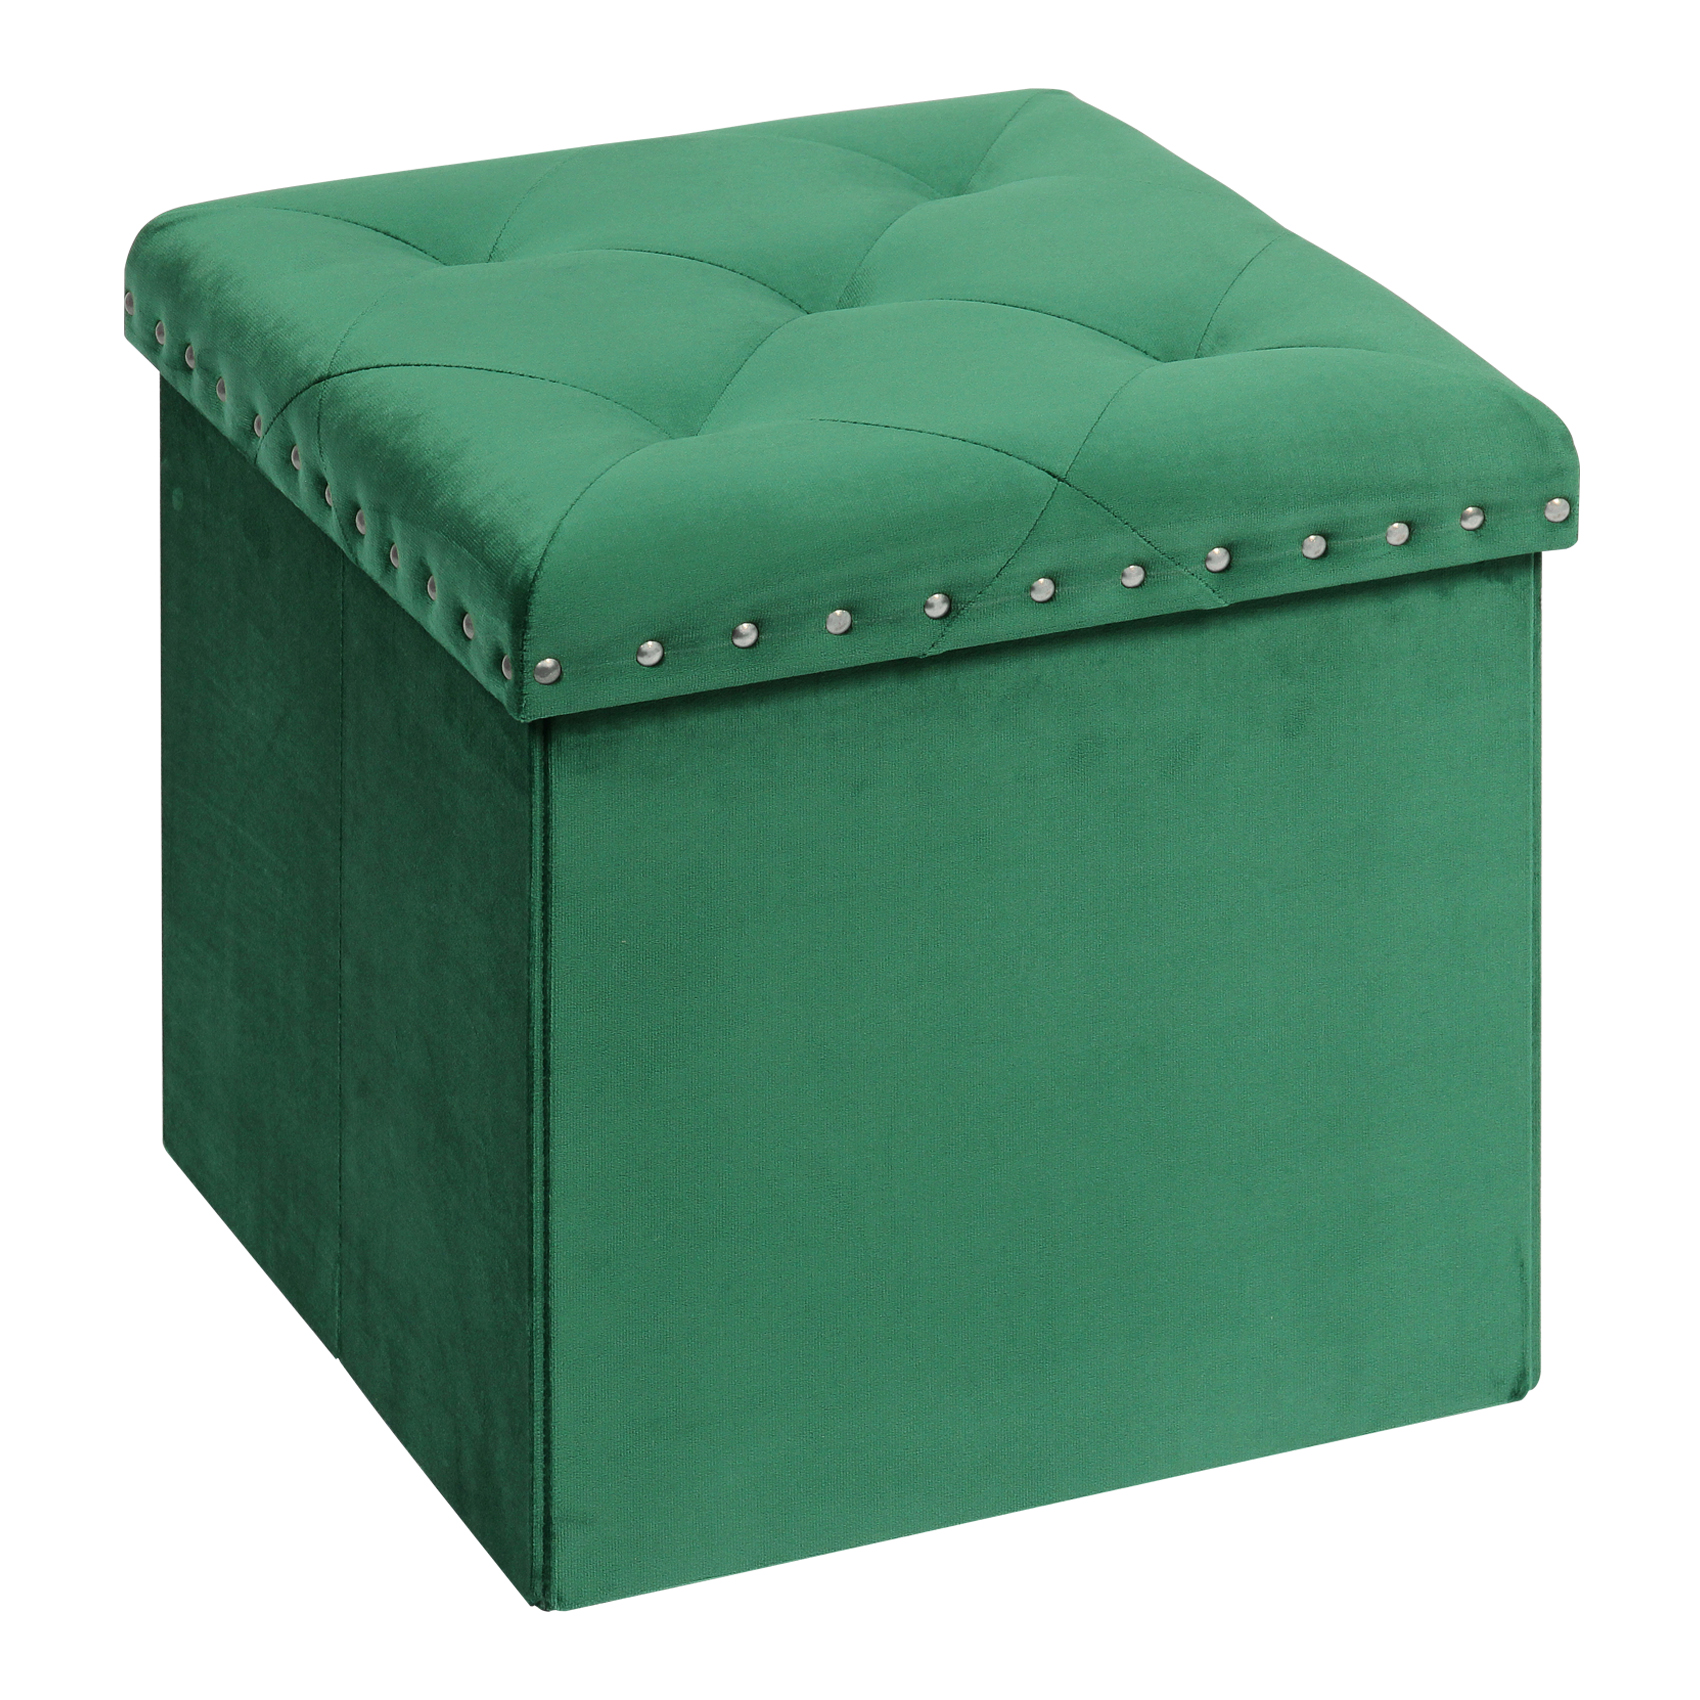 PINPLUS 15.7" Green Velvet Folding Storage Ottoman Cube, Small Foot Rest Stool, Window Seat for Living Room, Toy Chest Box with Rivet Tray - image 1 of 5